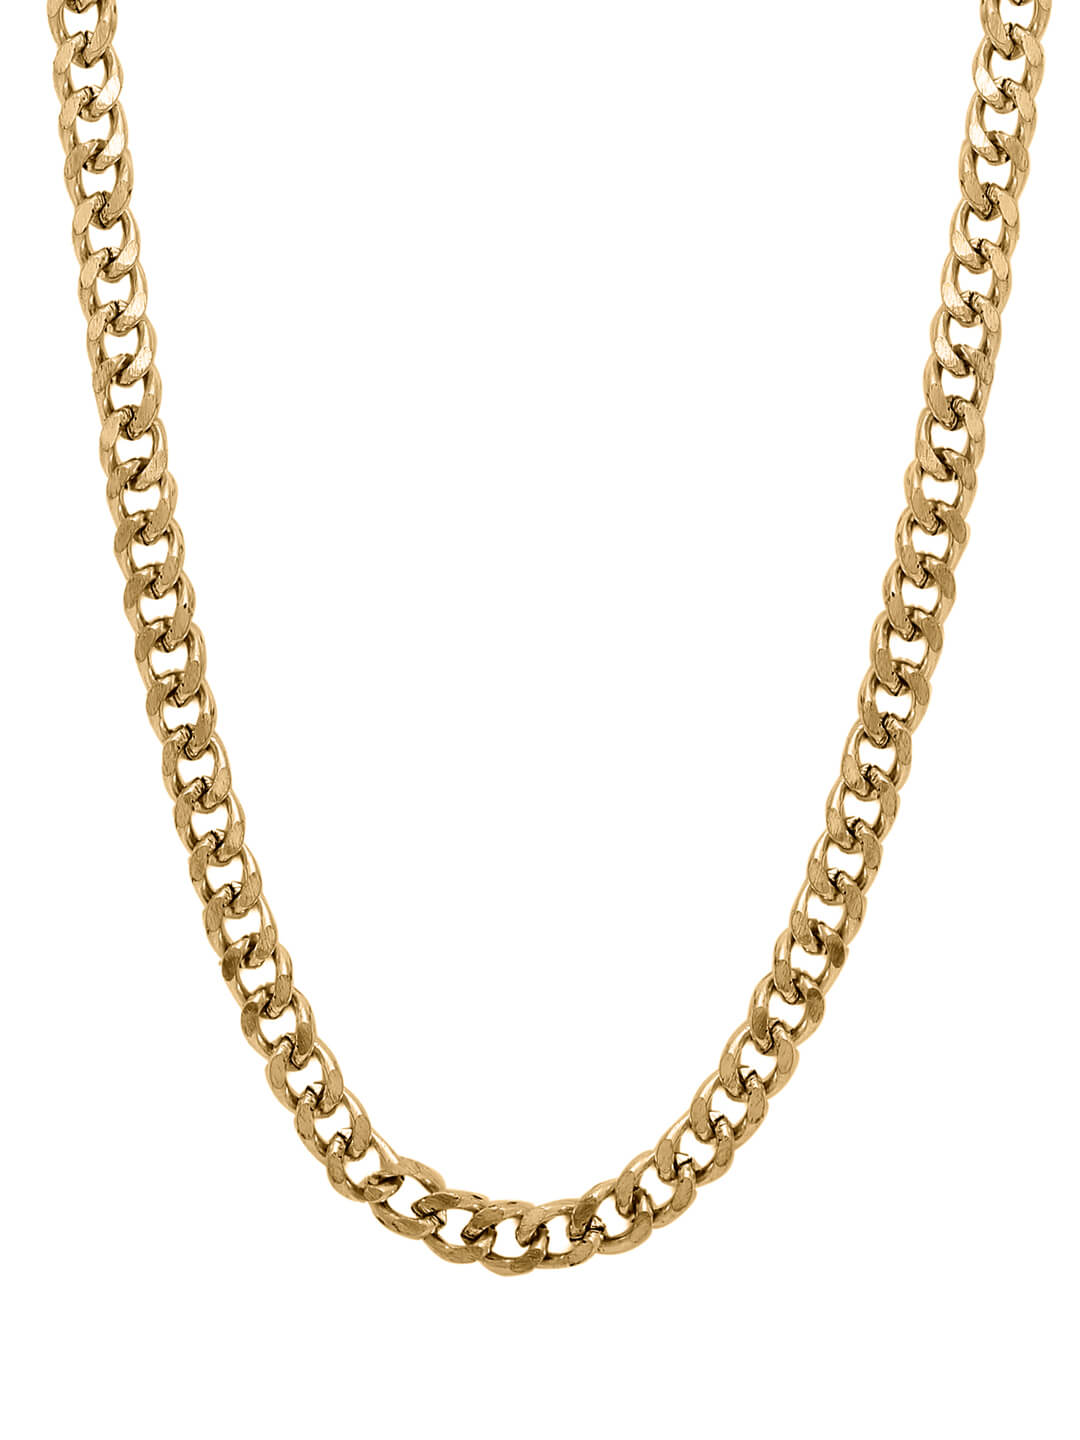 gold-plated-curb-design-mask-chain-3-in-1-viraasi